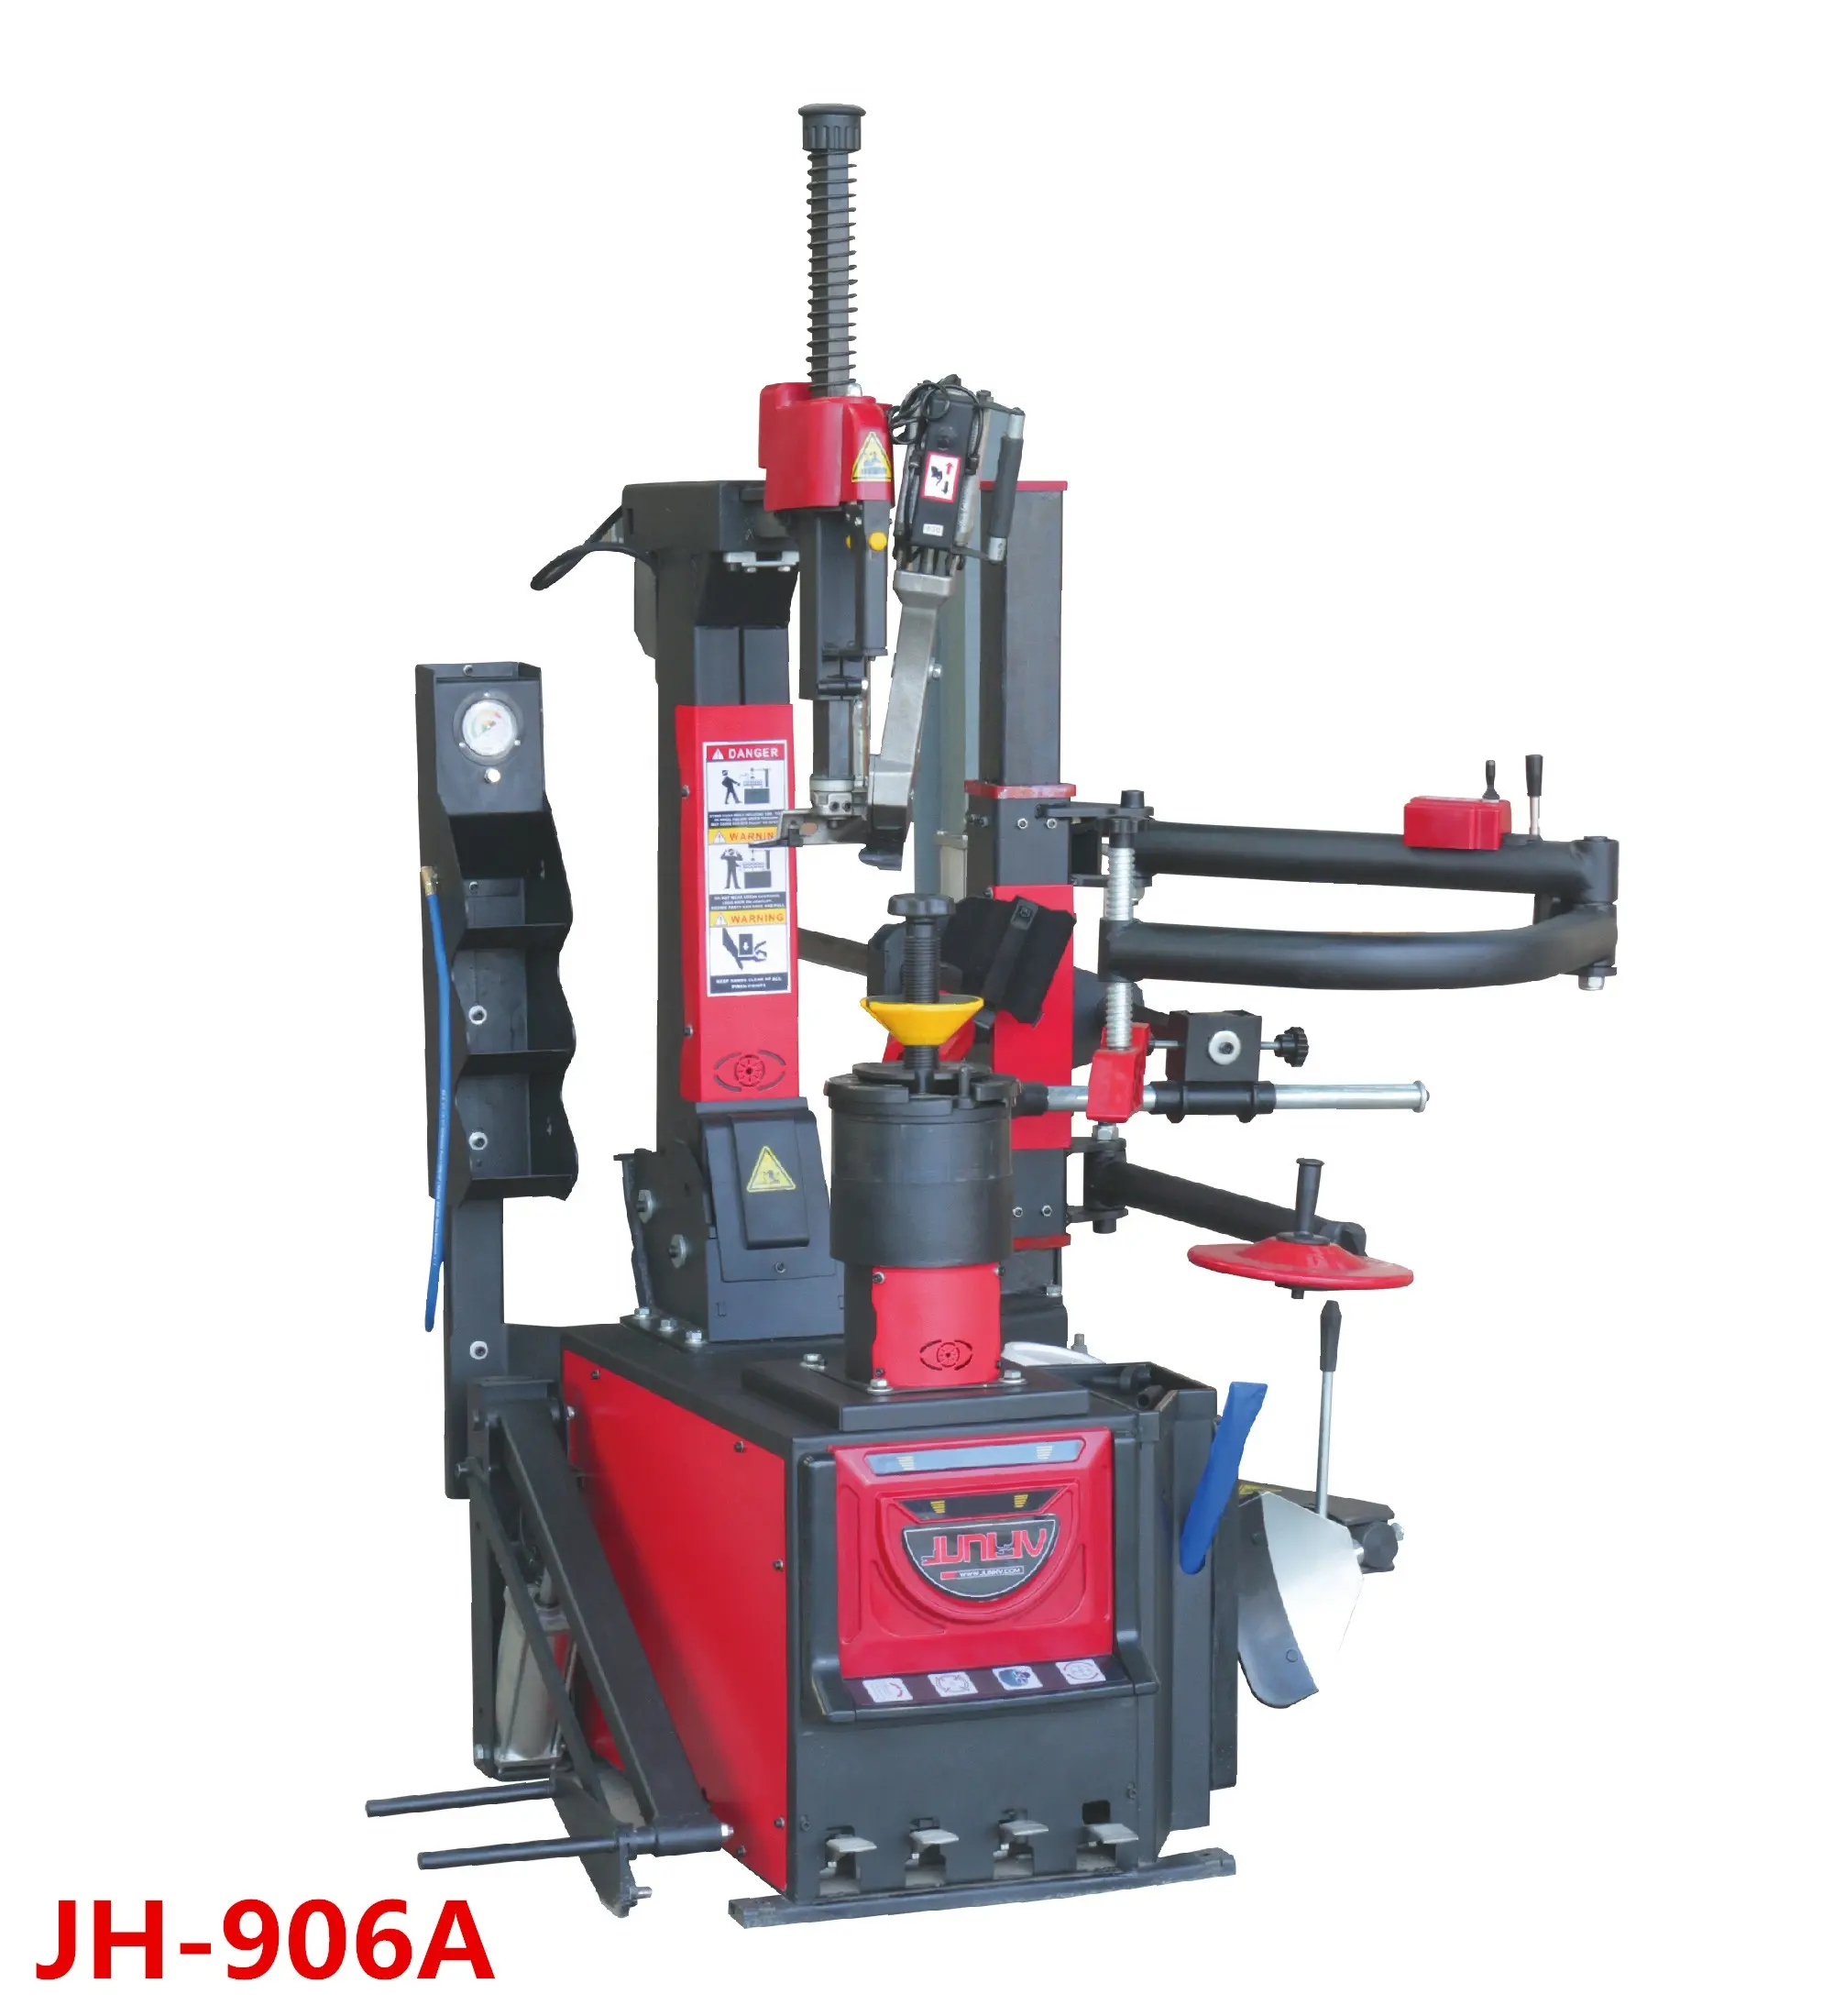 China supplier used tyre changer / tyre changer full automatic JH-906A with Flexible operation